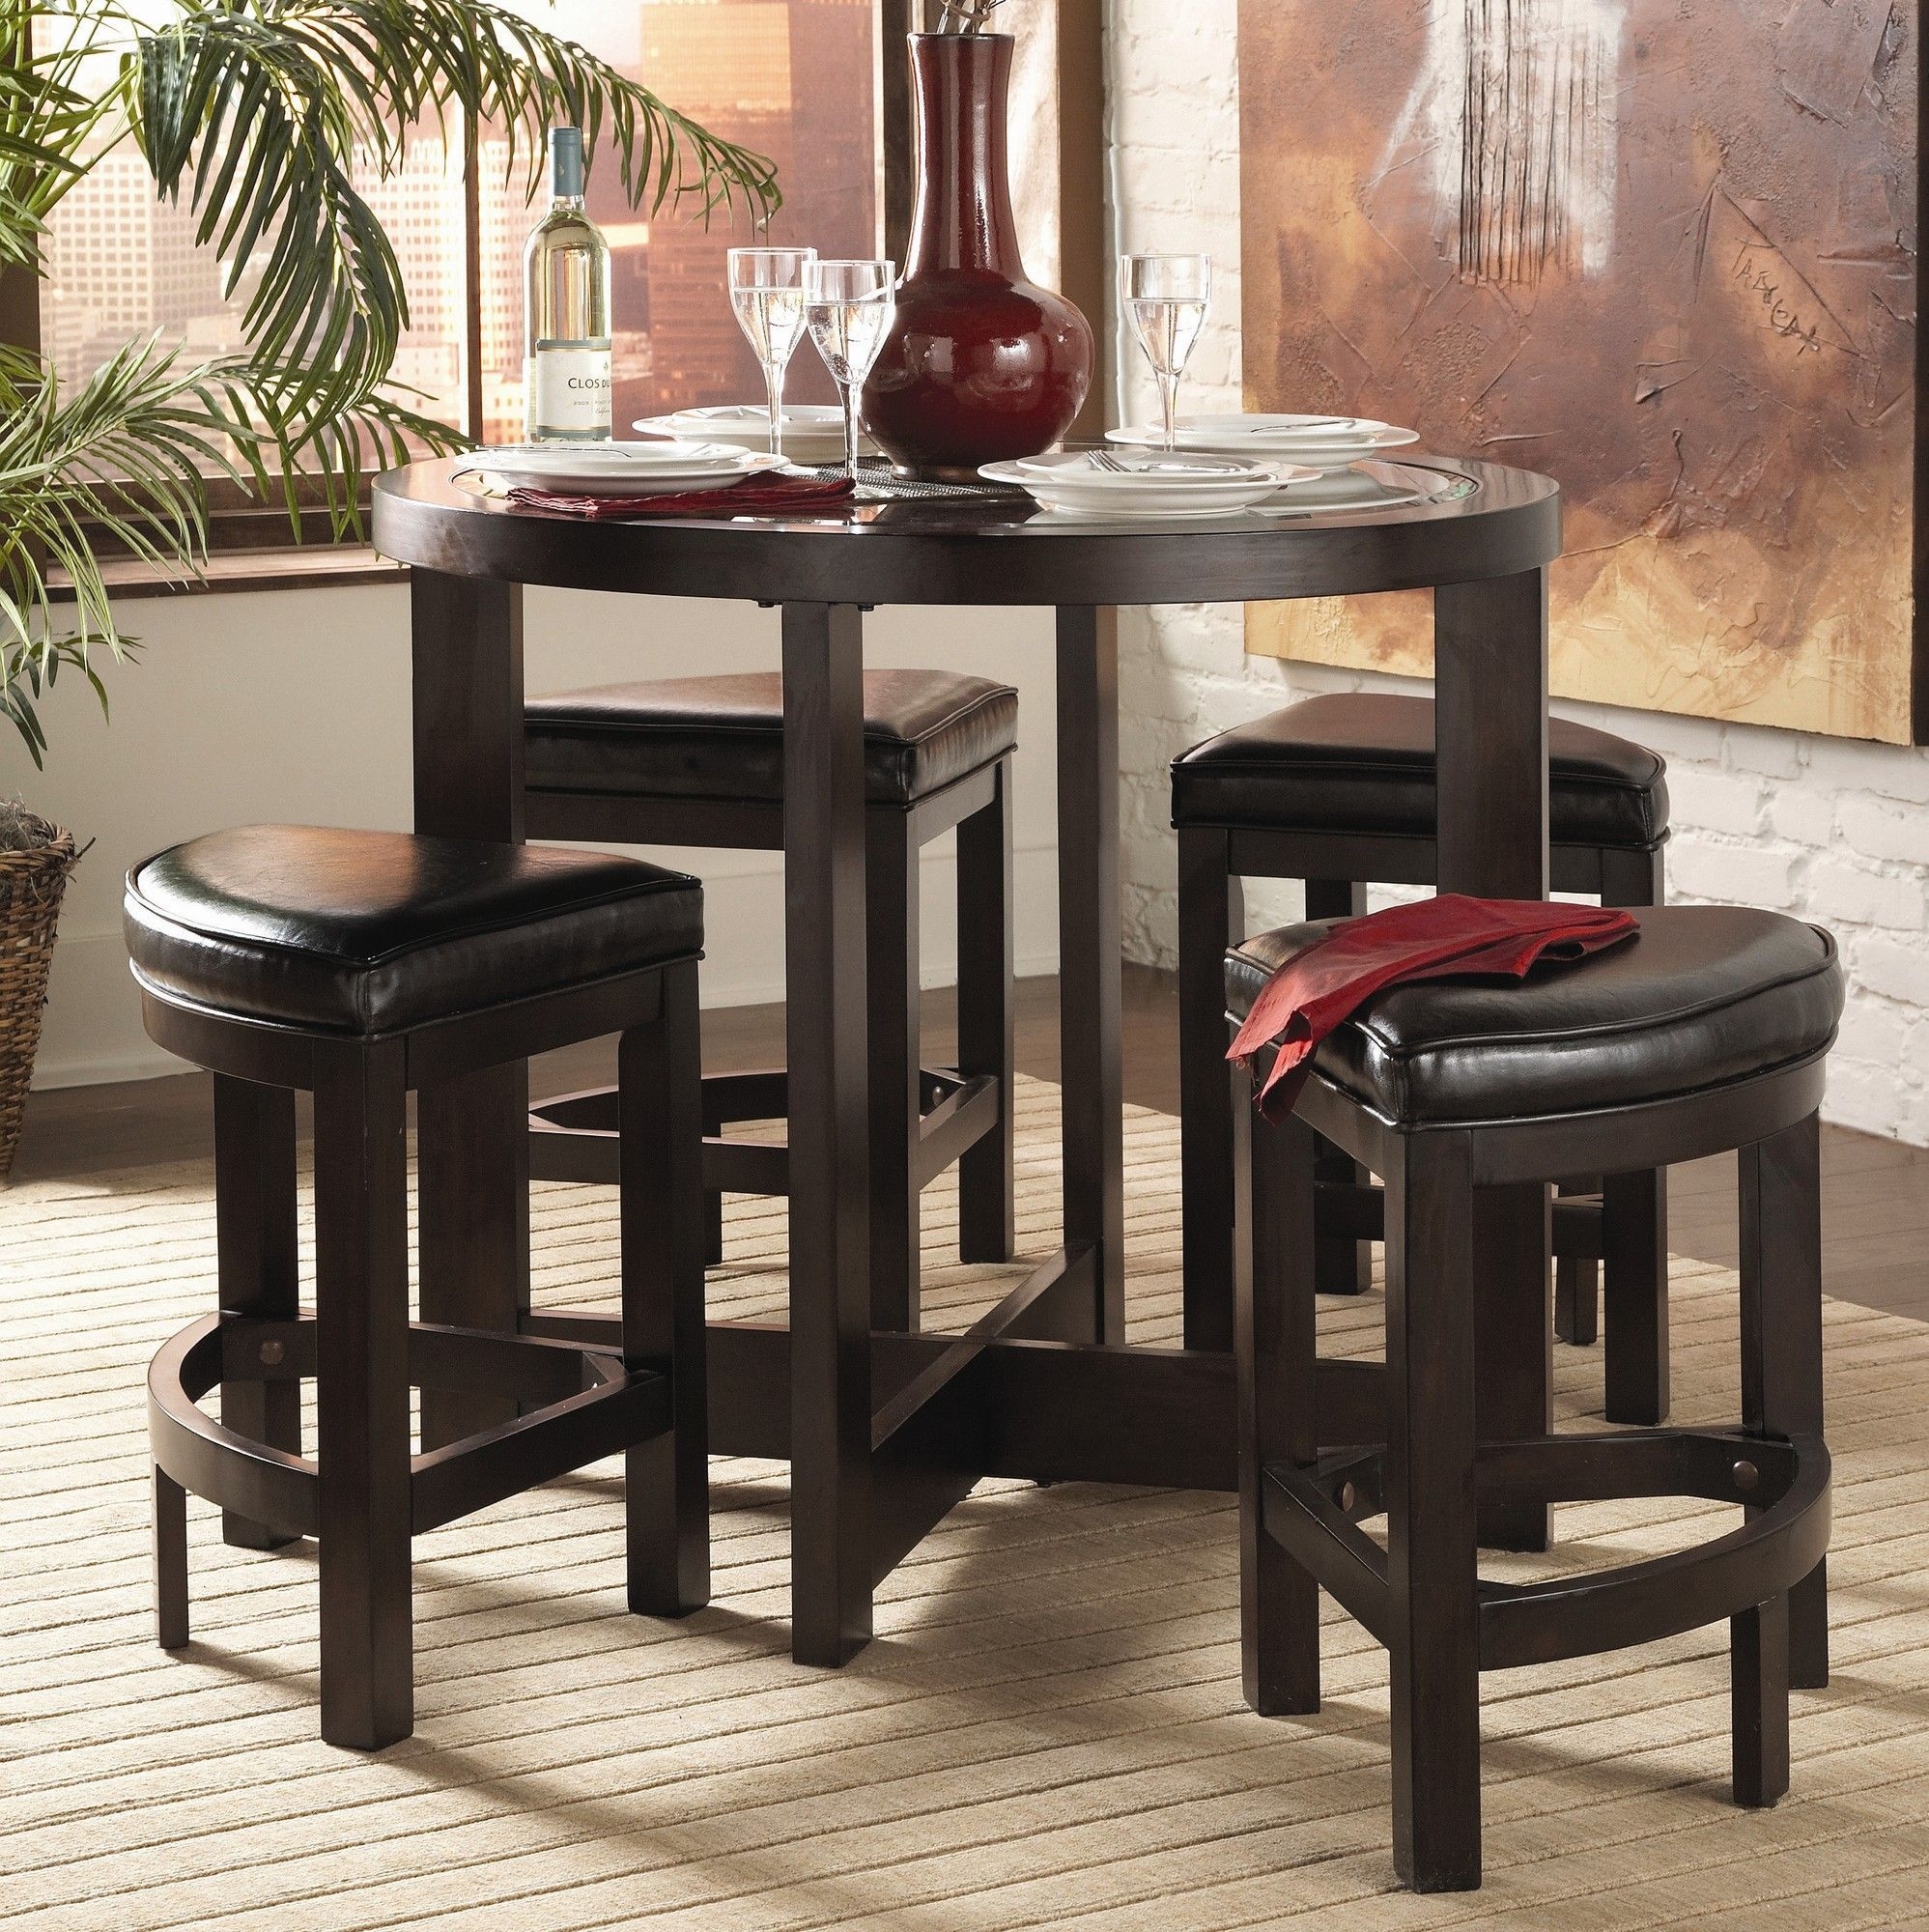 Overstock capria pub set features clean lines and wedge seating